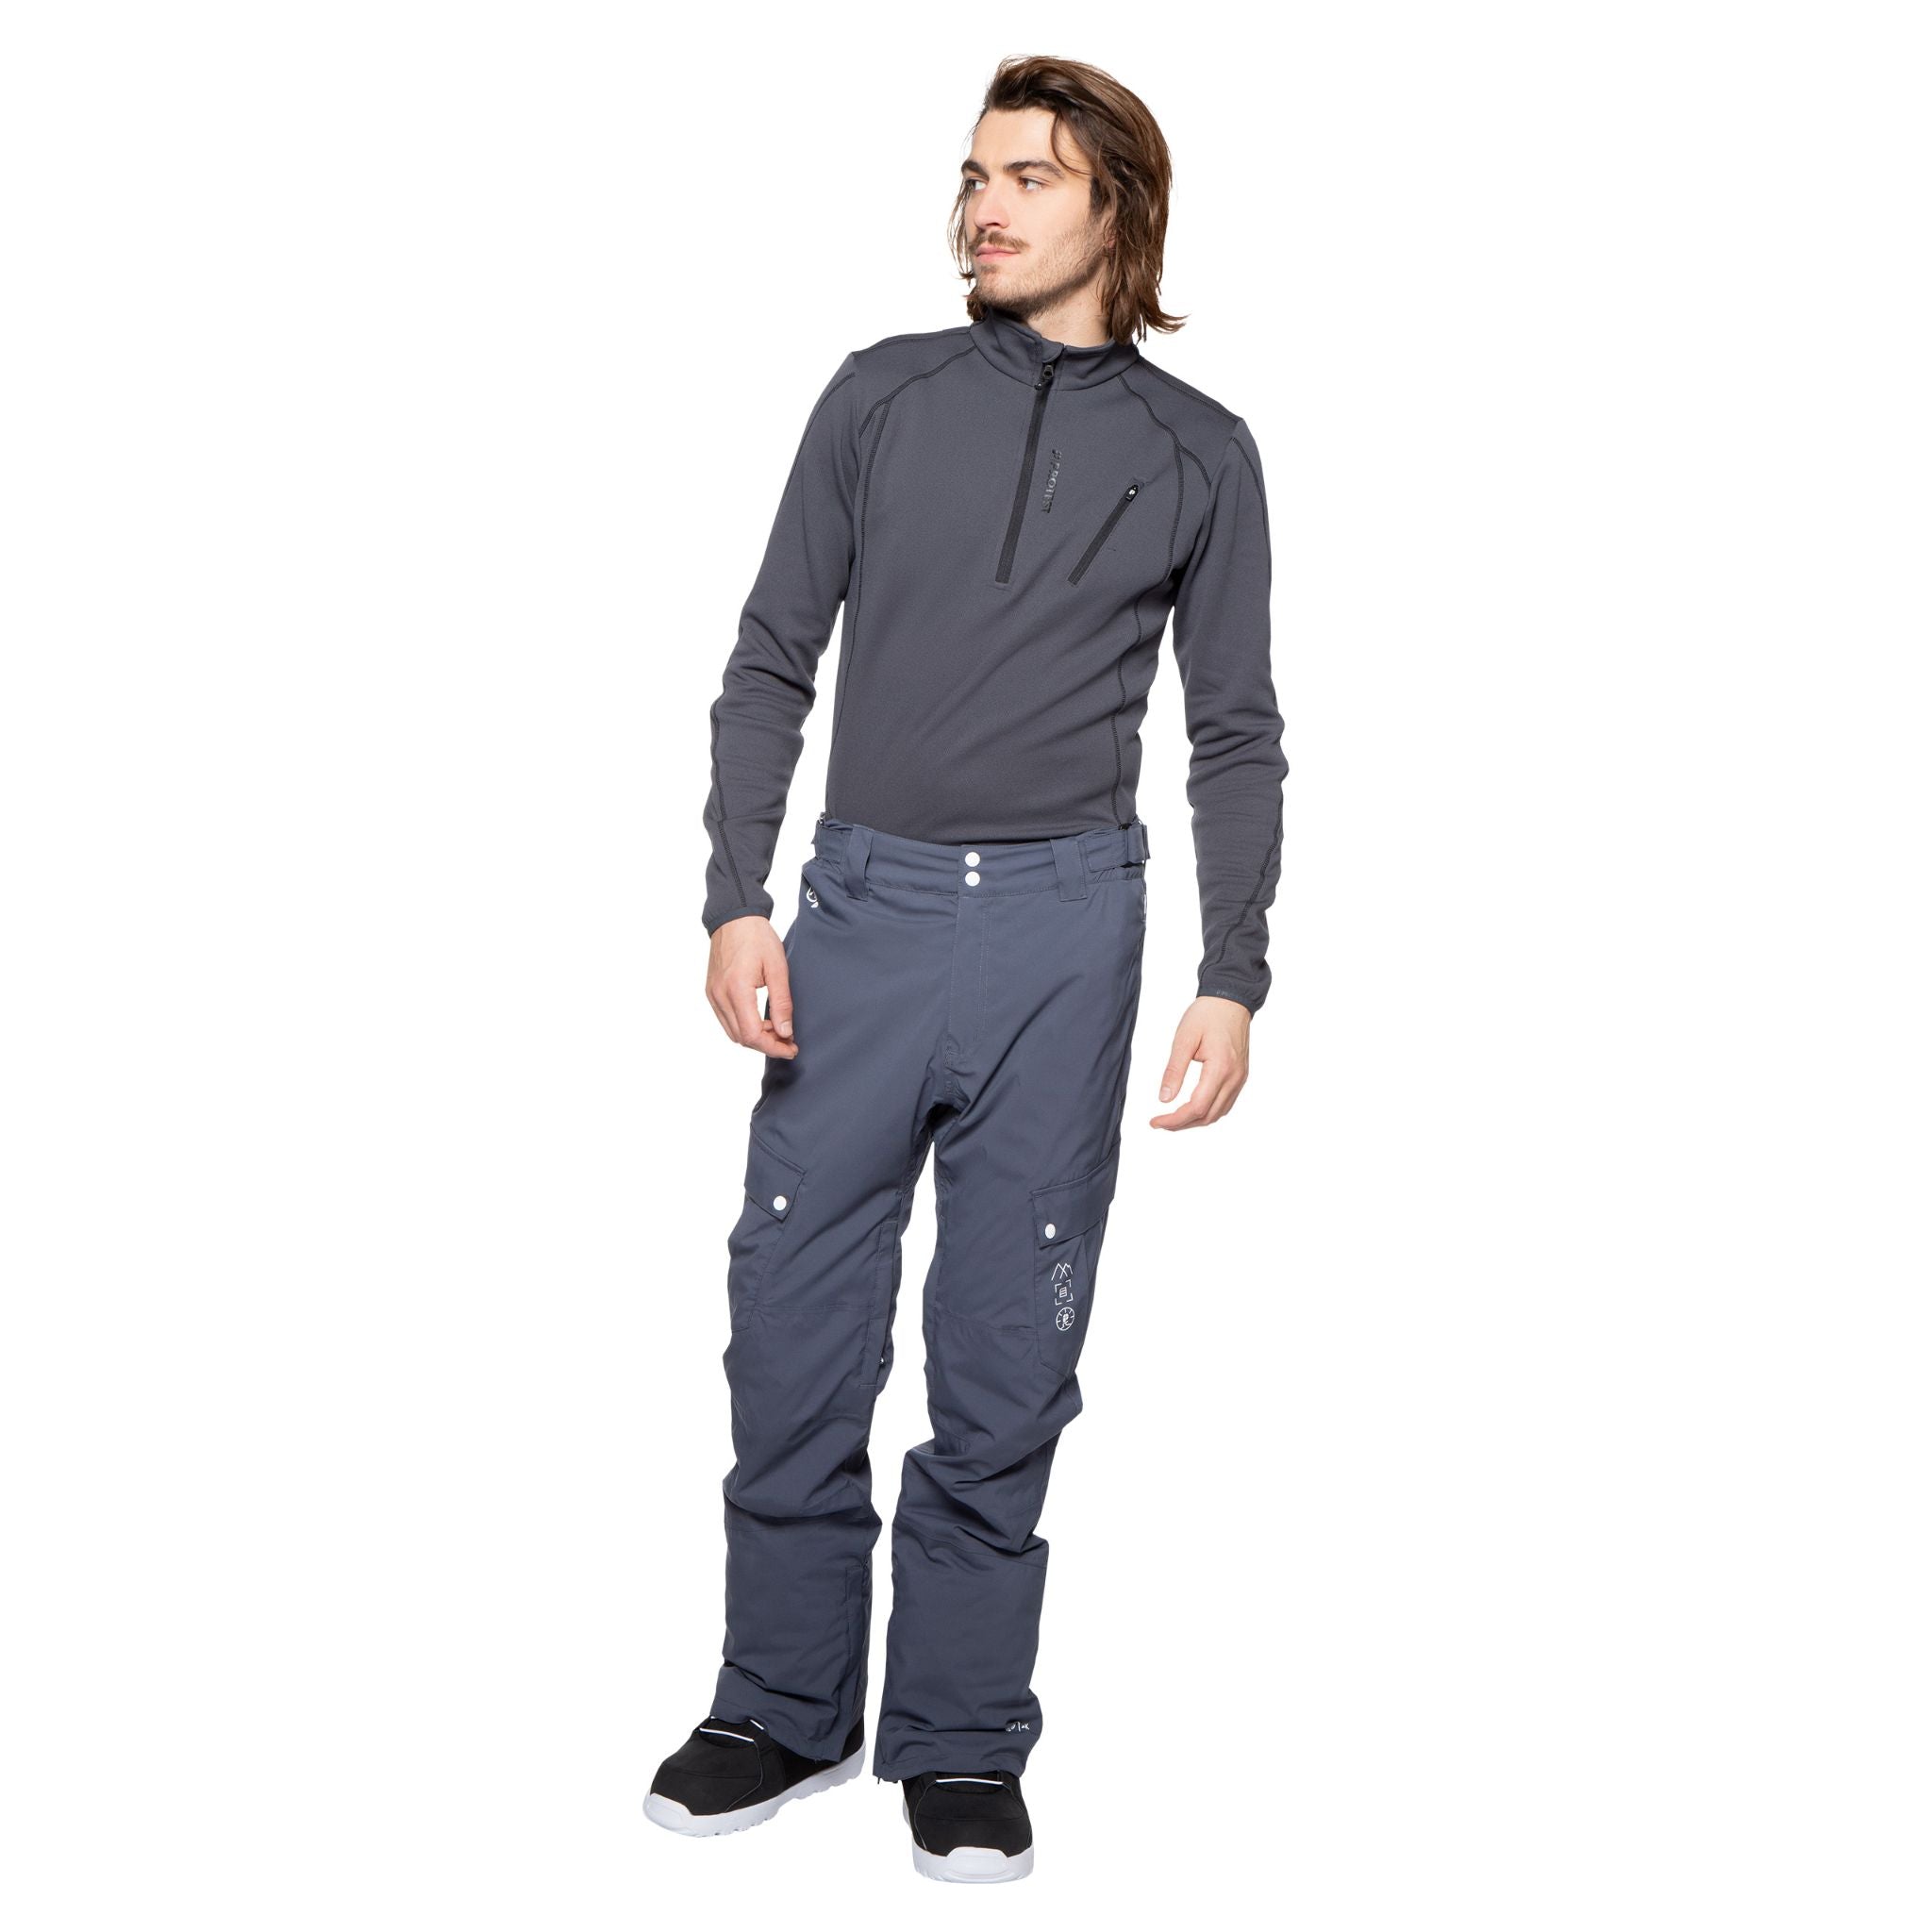 Protest Zucca Mens Snow Pants